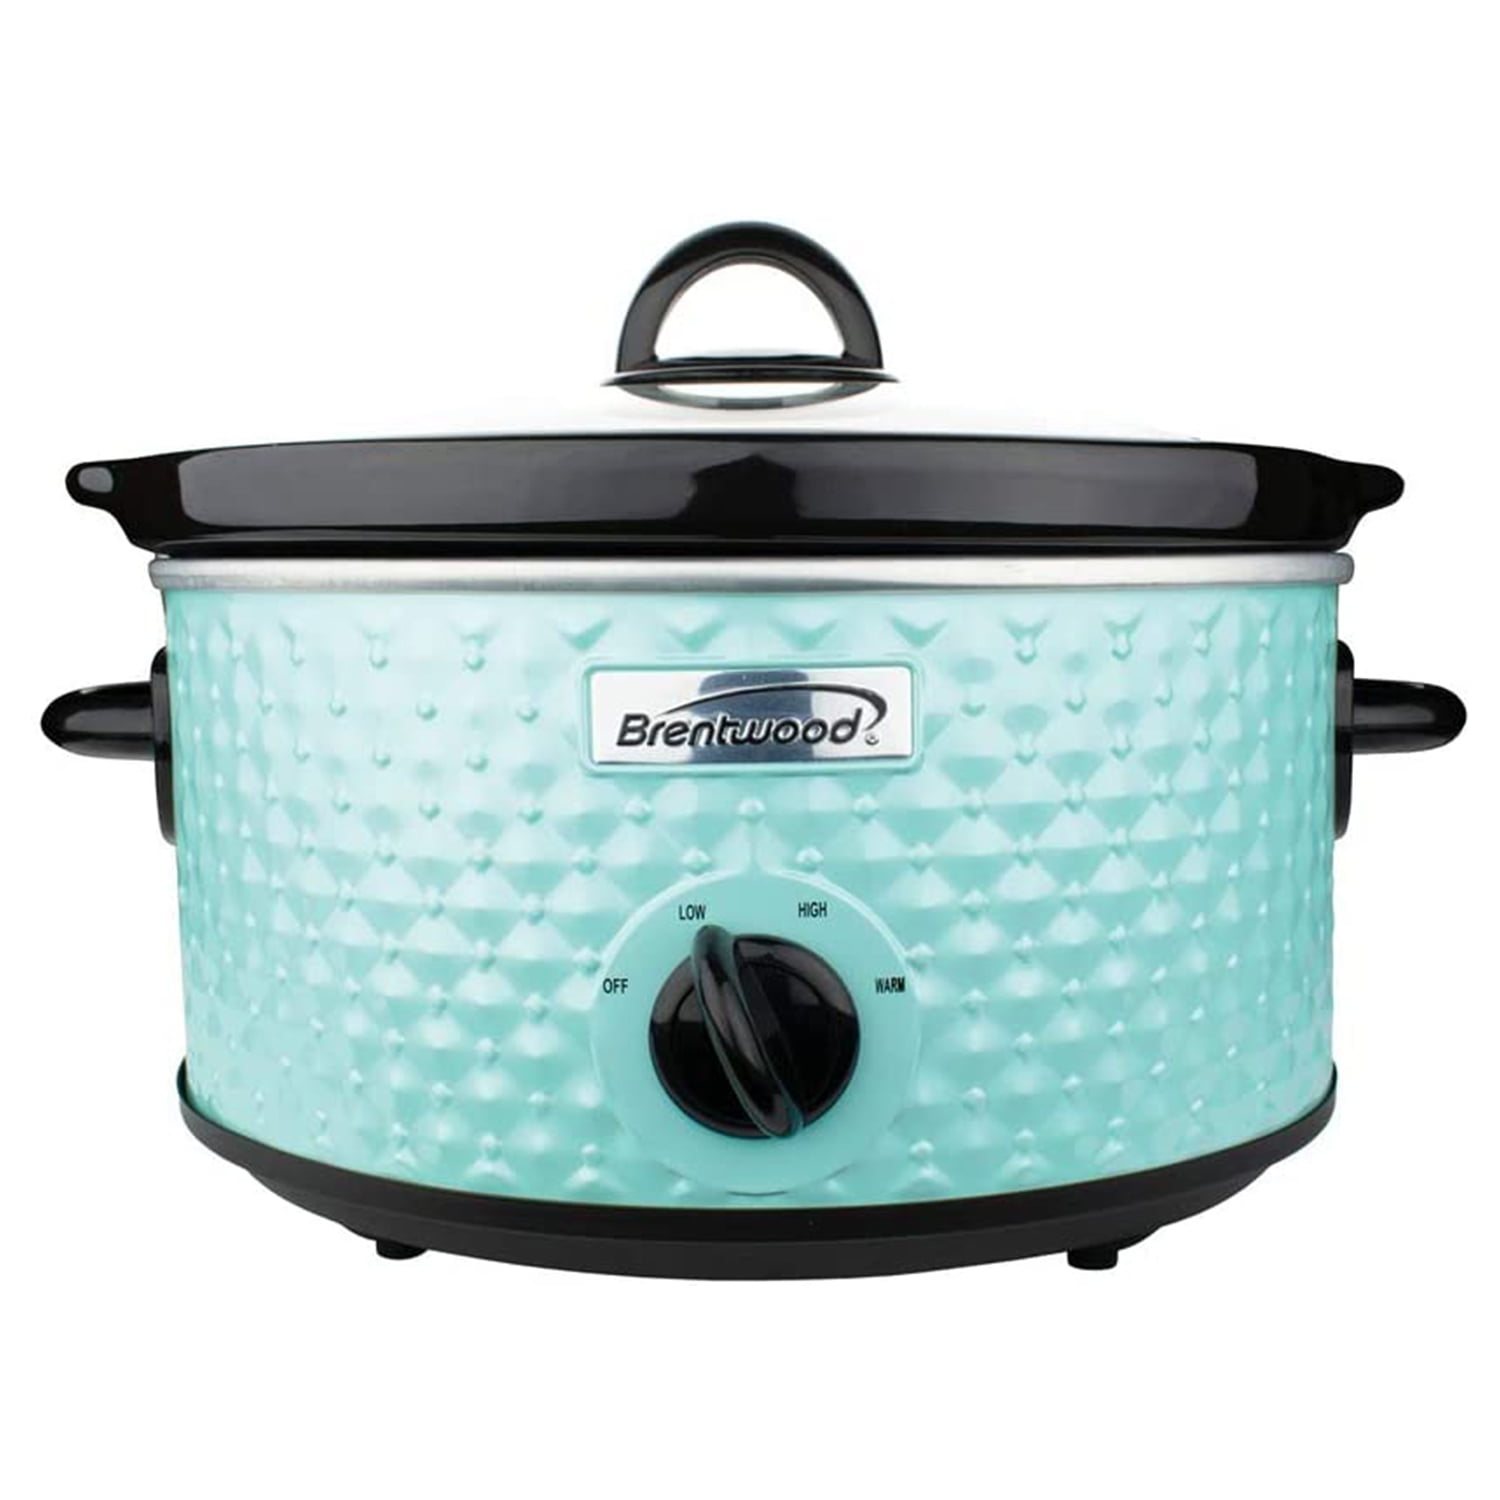 Brentwood Appliances Scallop 4.5 Qt. Blue Slow Cooker with Tempered Glass  Lid SC-140BL - The Home Depot